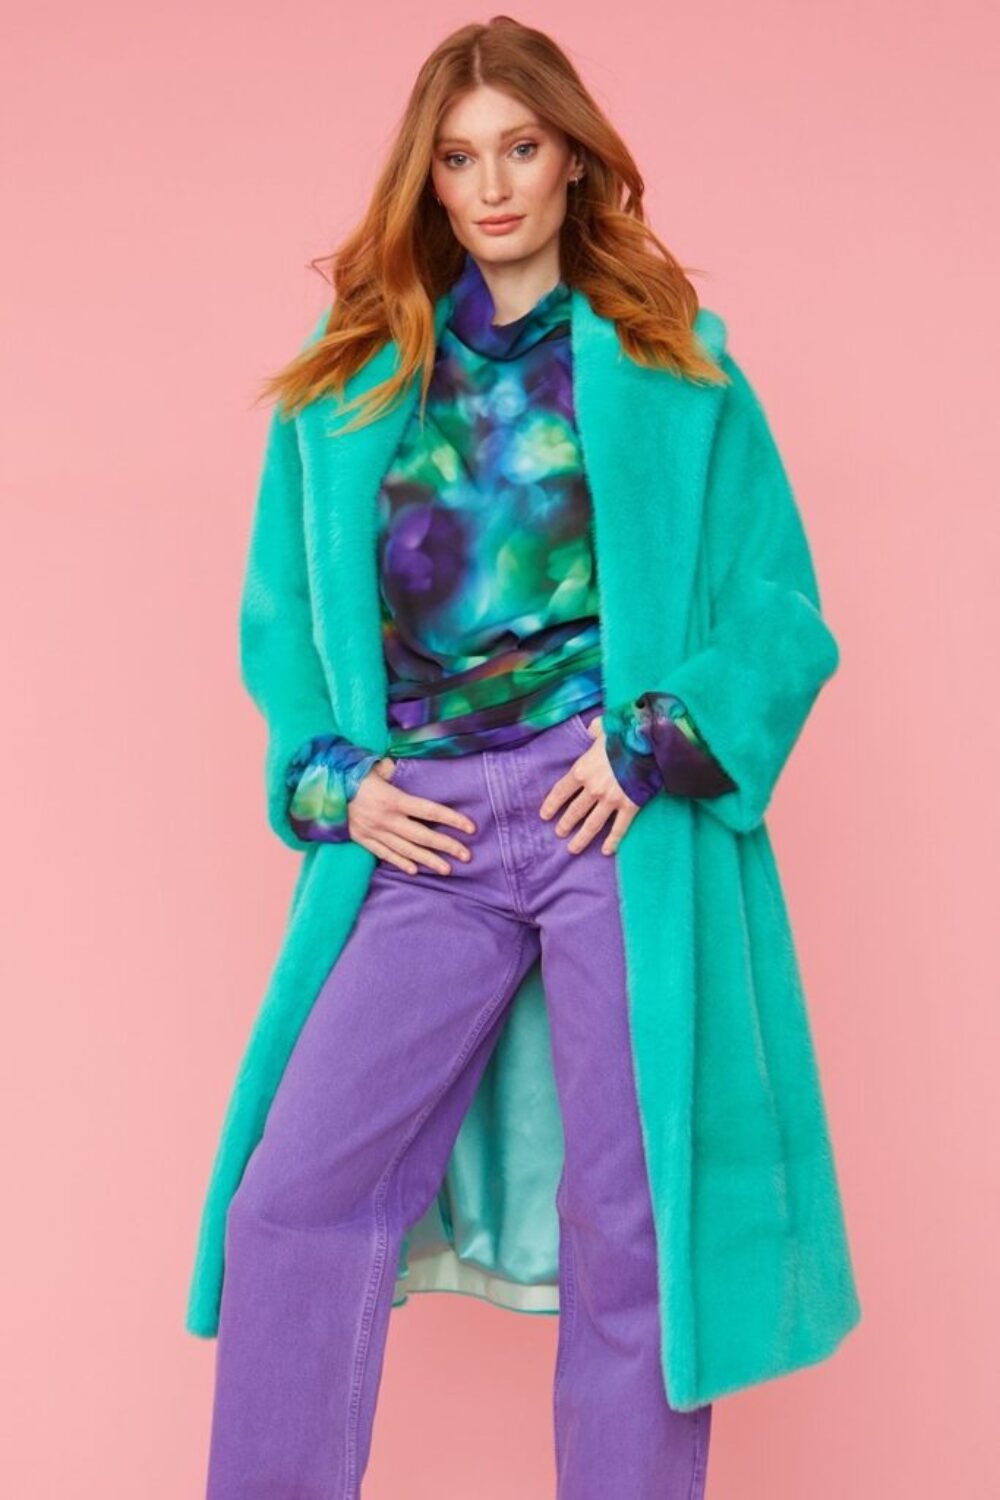 Shop Lux Turquoise Faux Fur Midi Coat and women's luxury and designer clothes at www.lux-apparel.co.uk